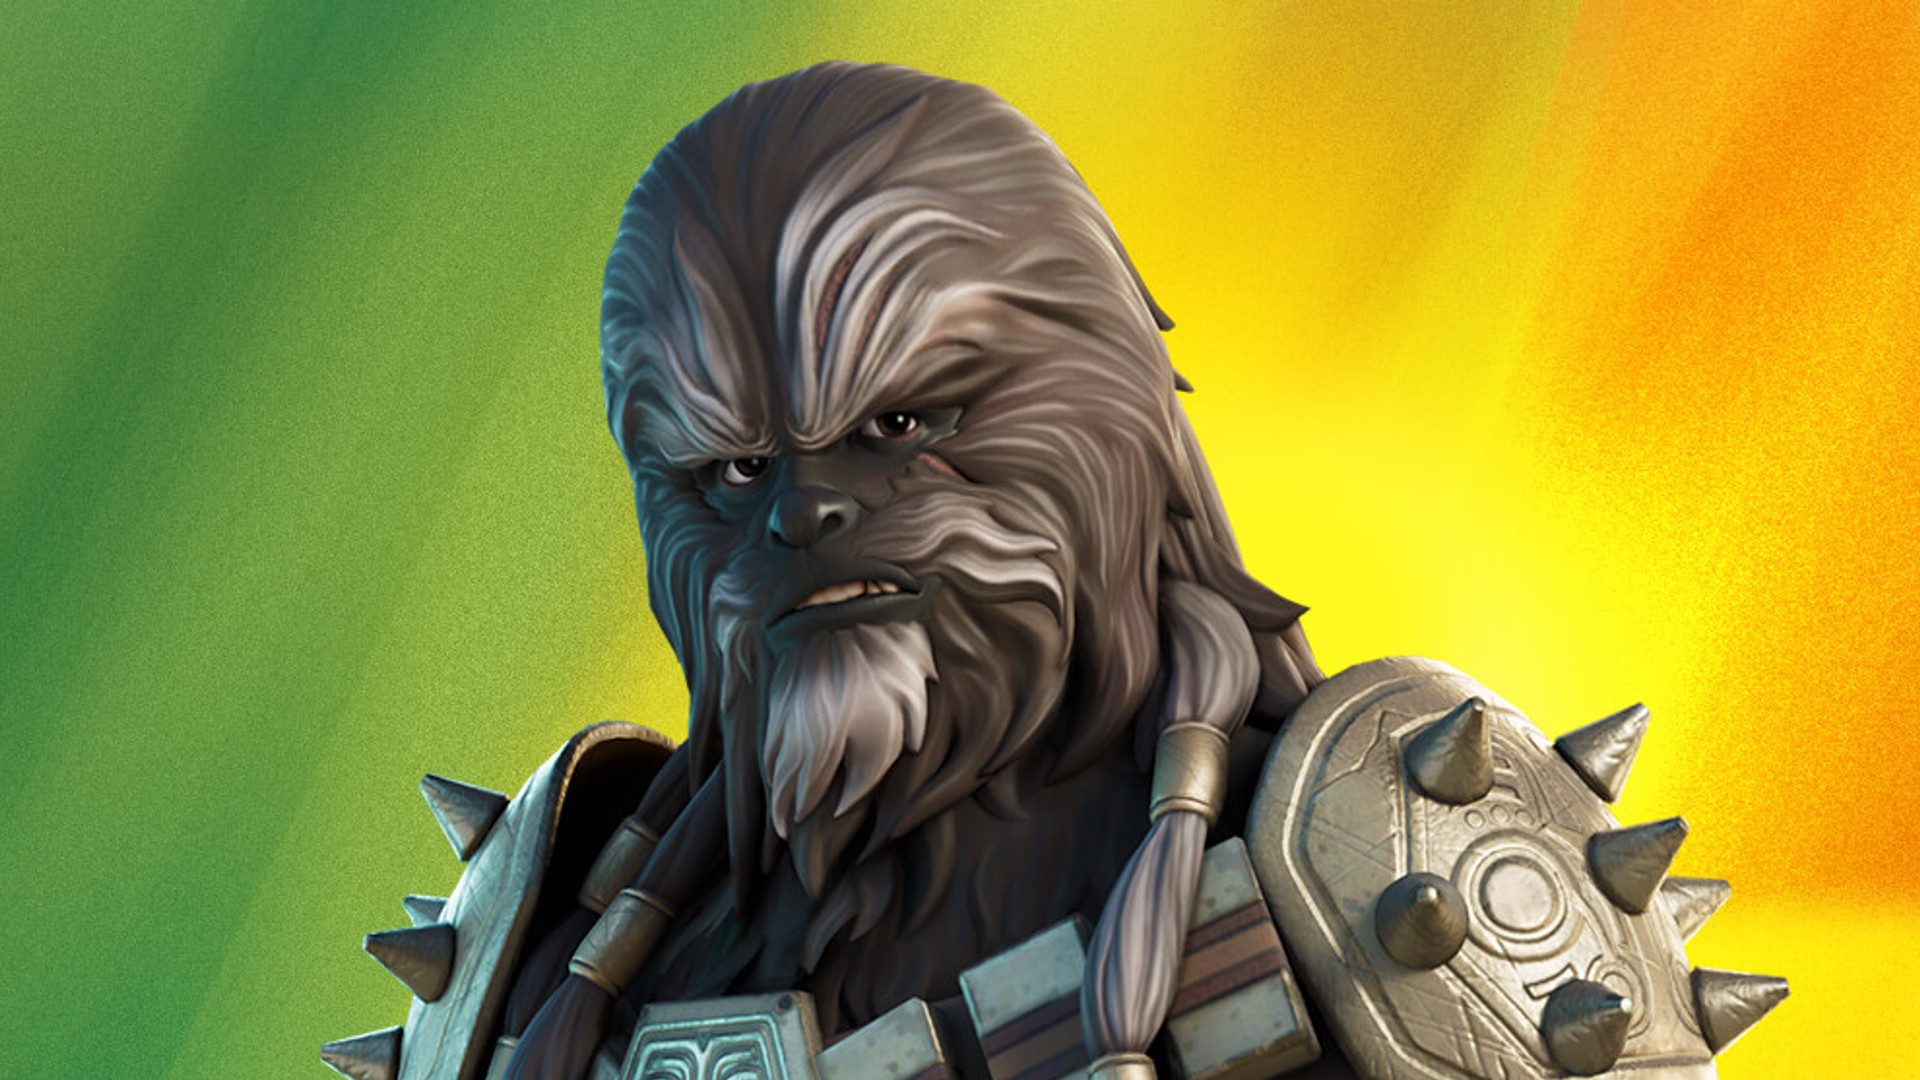  You can now be a wookiee in Fortnite, but not Chewie 